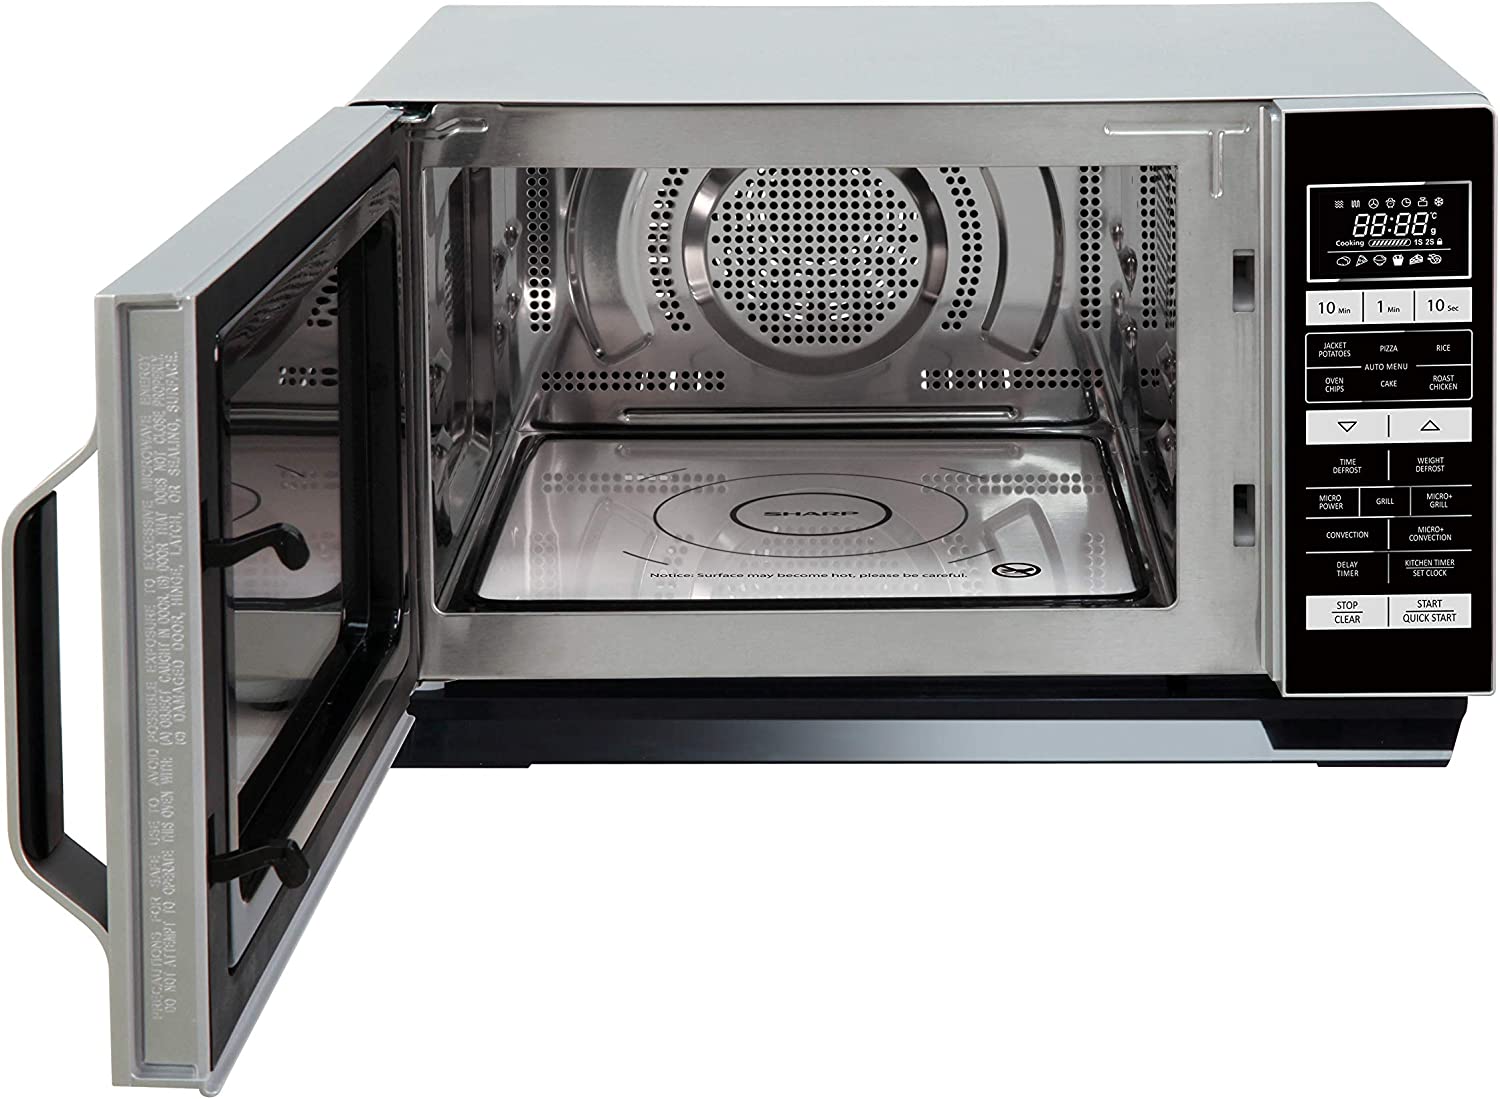 Sharp R860SLM Combination Flatbed Microwave Oven 25 Litre capacity 900W, Silver